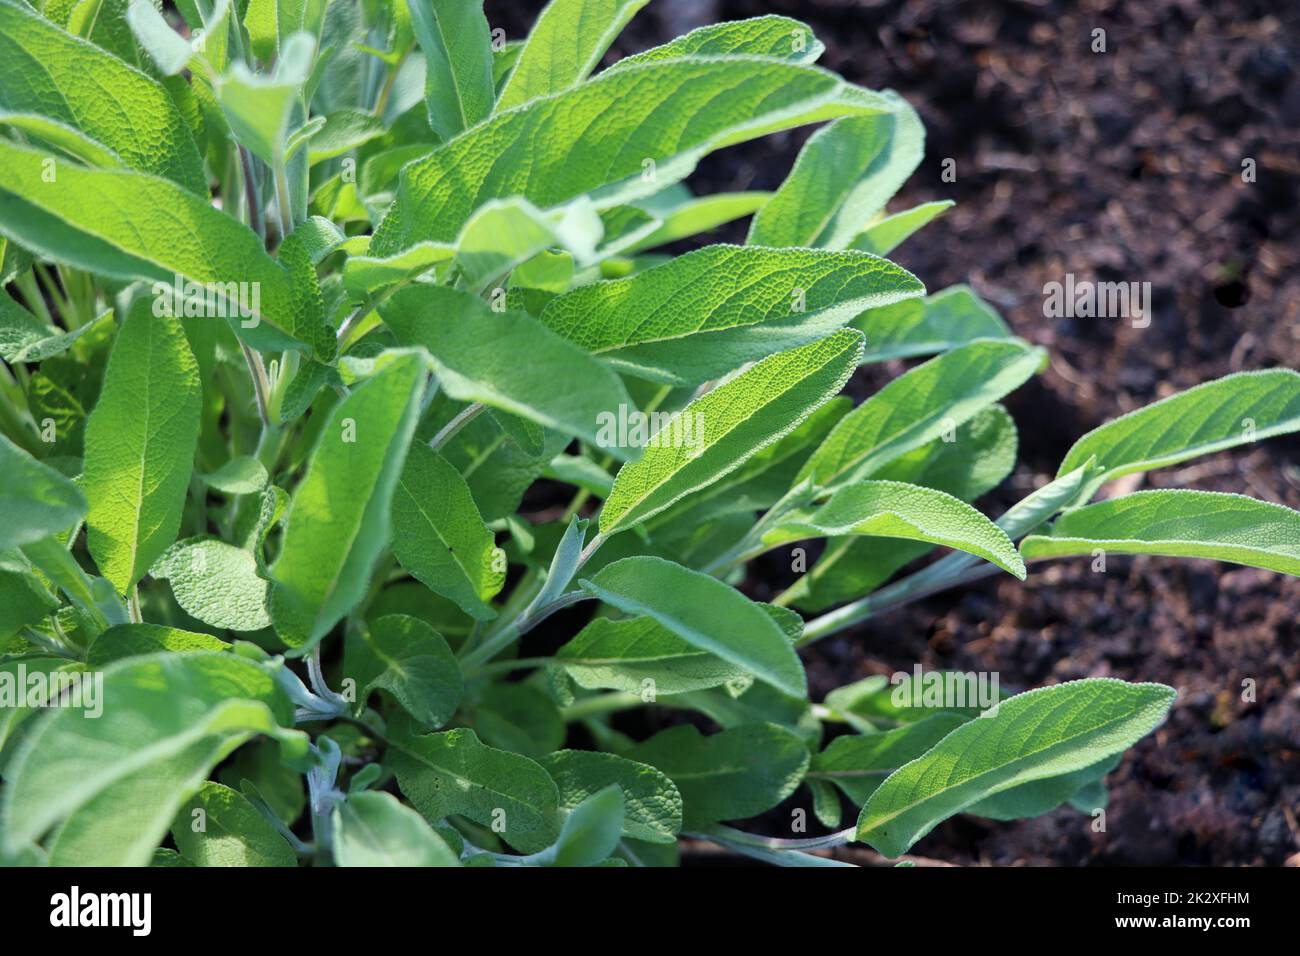 Salvia officinalis or common sage - perennial subshrub, used in medicinal and culinary. Bush of aromatic sage growing outdoors in the garden Stock Photo